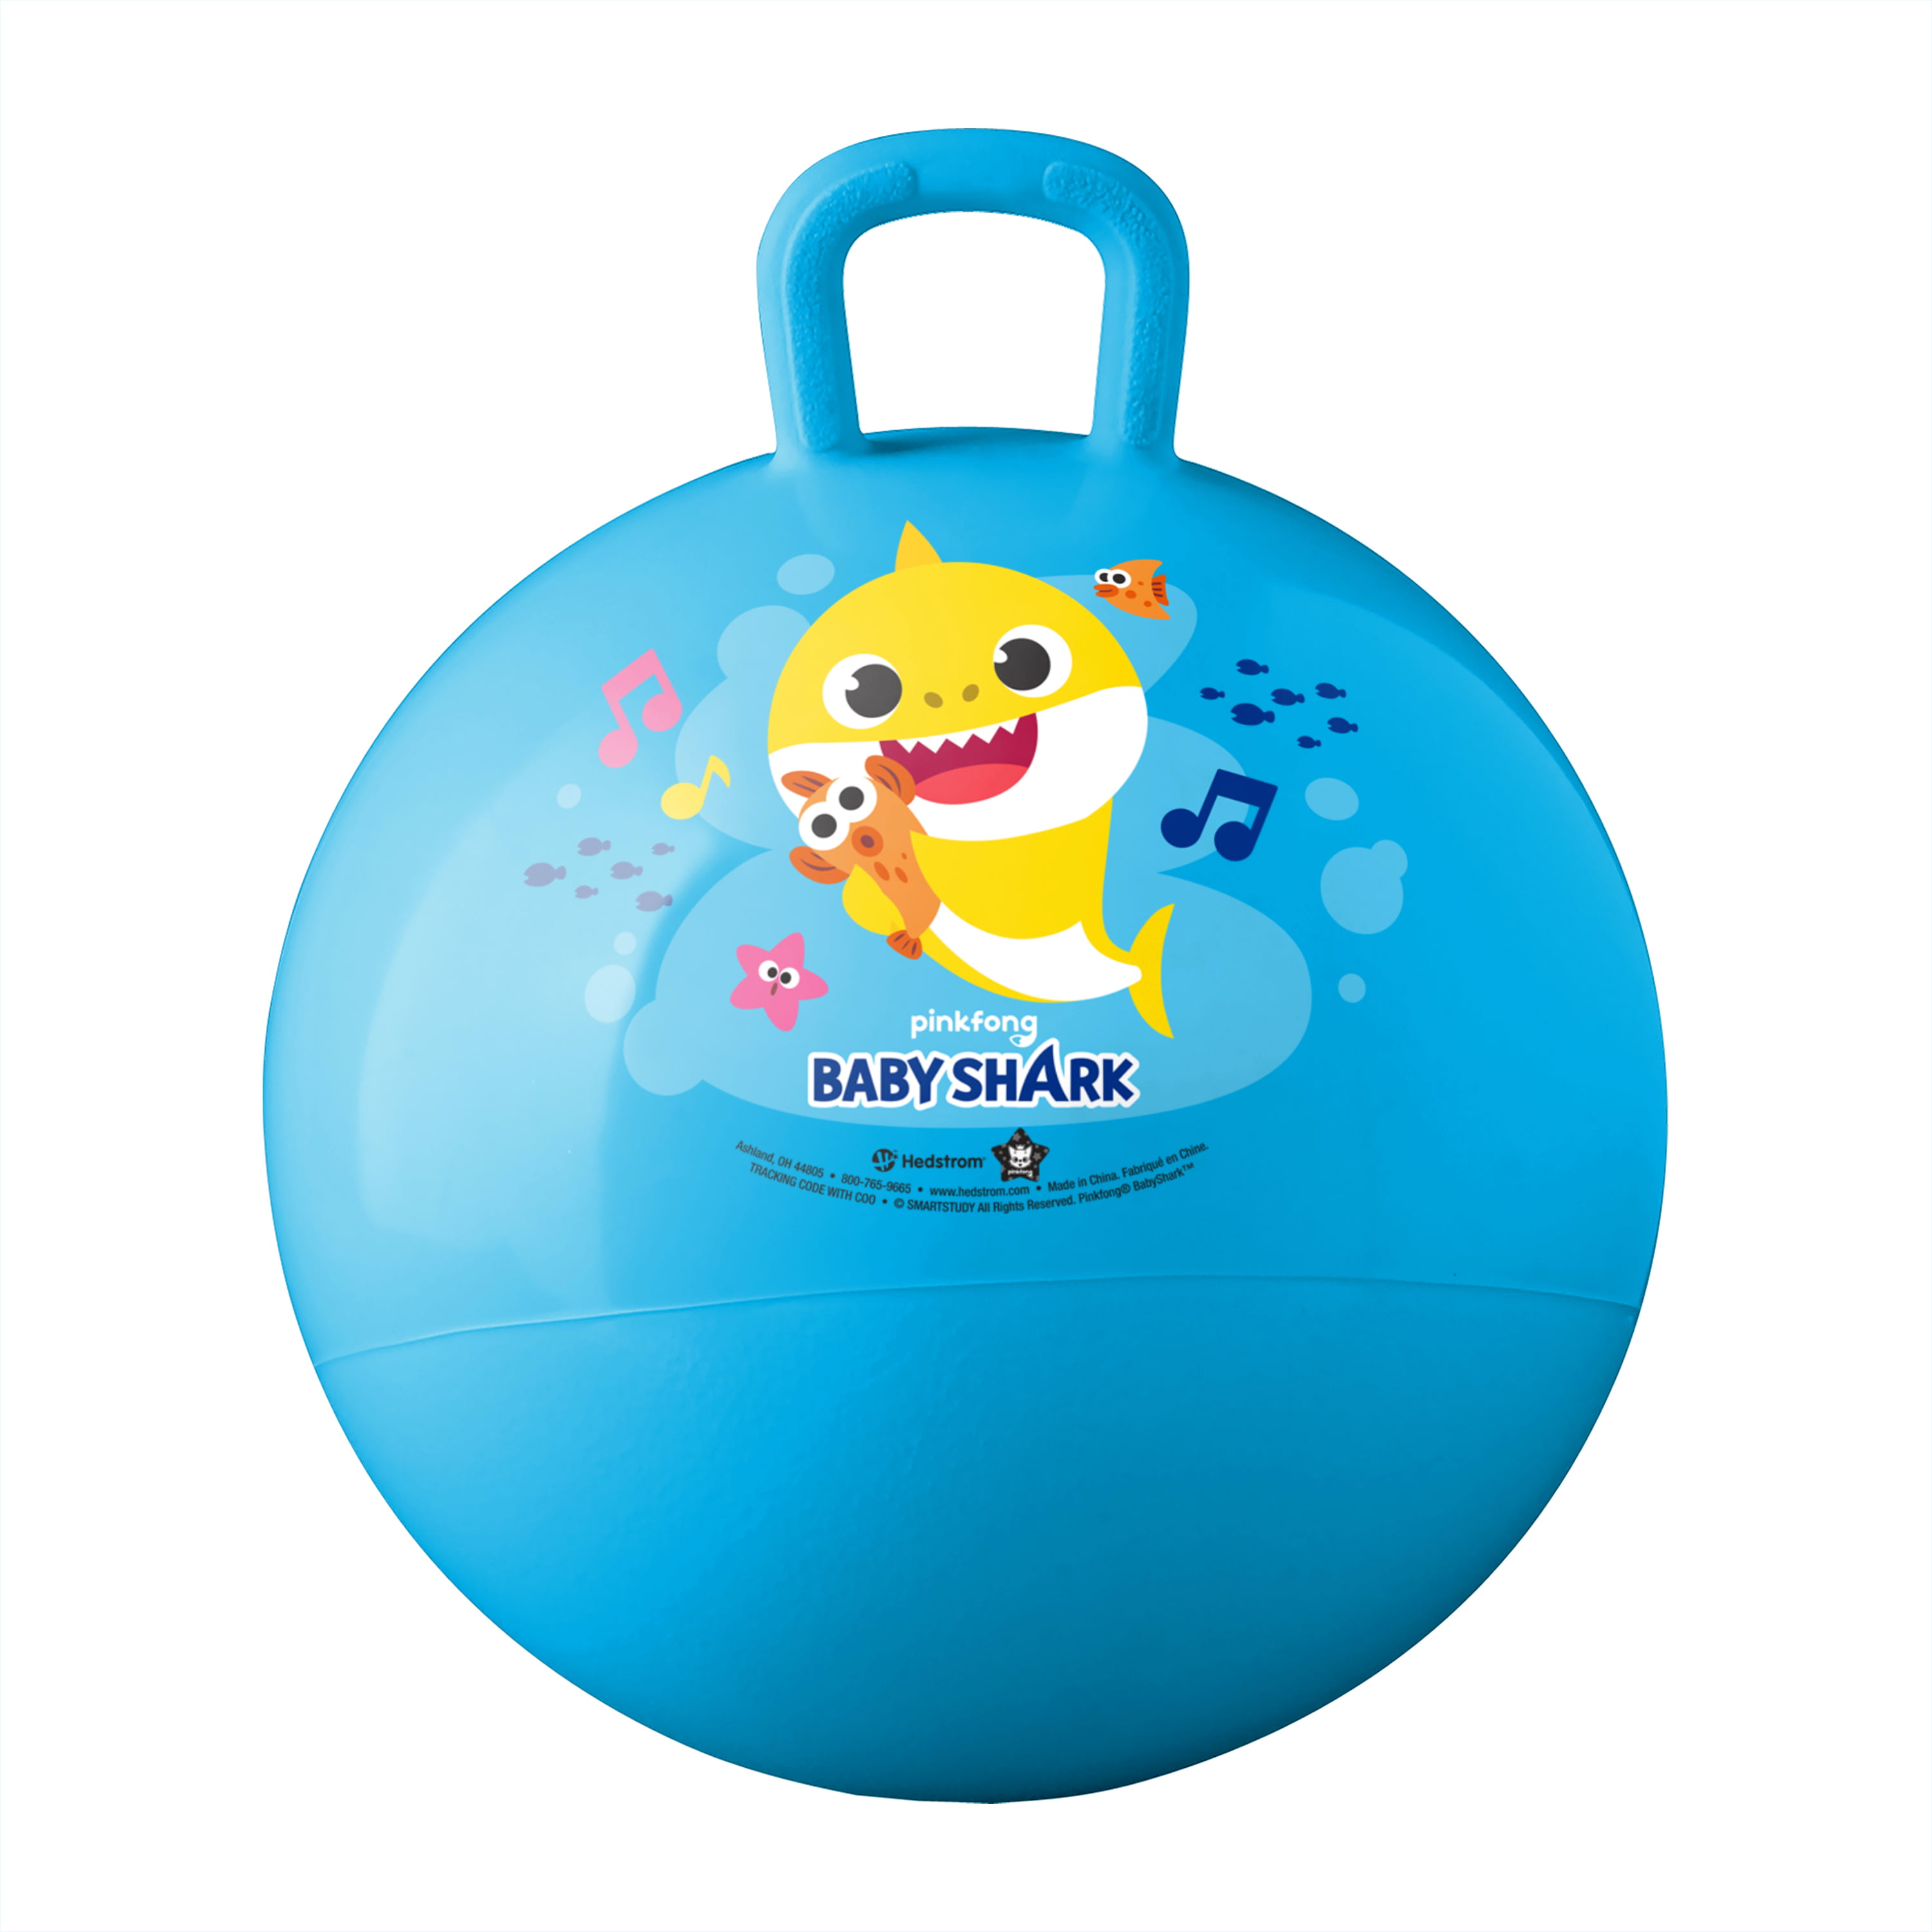 Hedstrom Toddler Sit On Ball Bounce on Top Bouncy Bouncer Toy Disney FROZEN NEW 